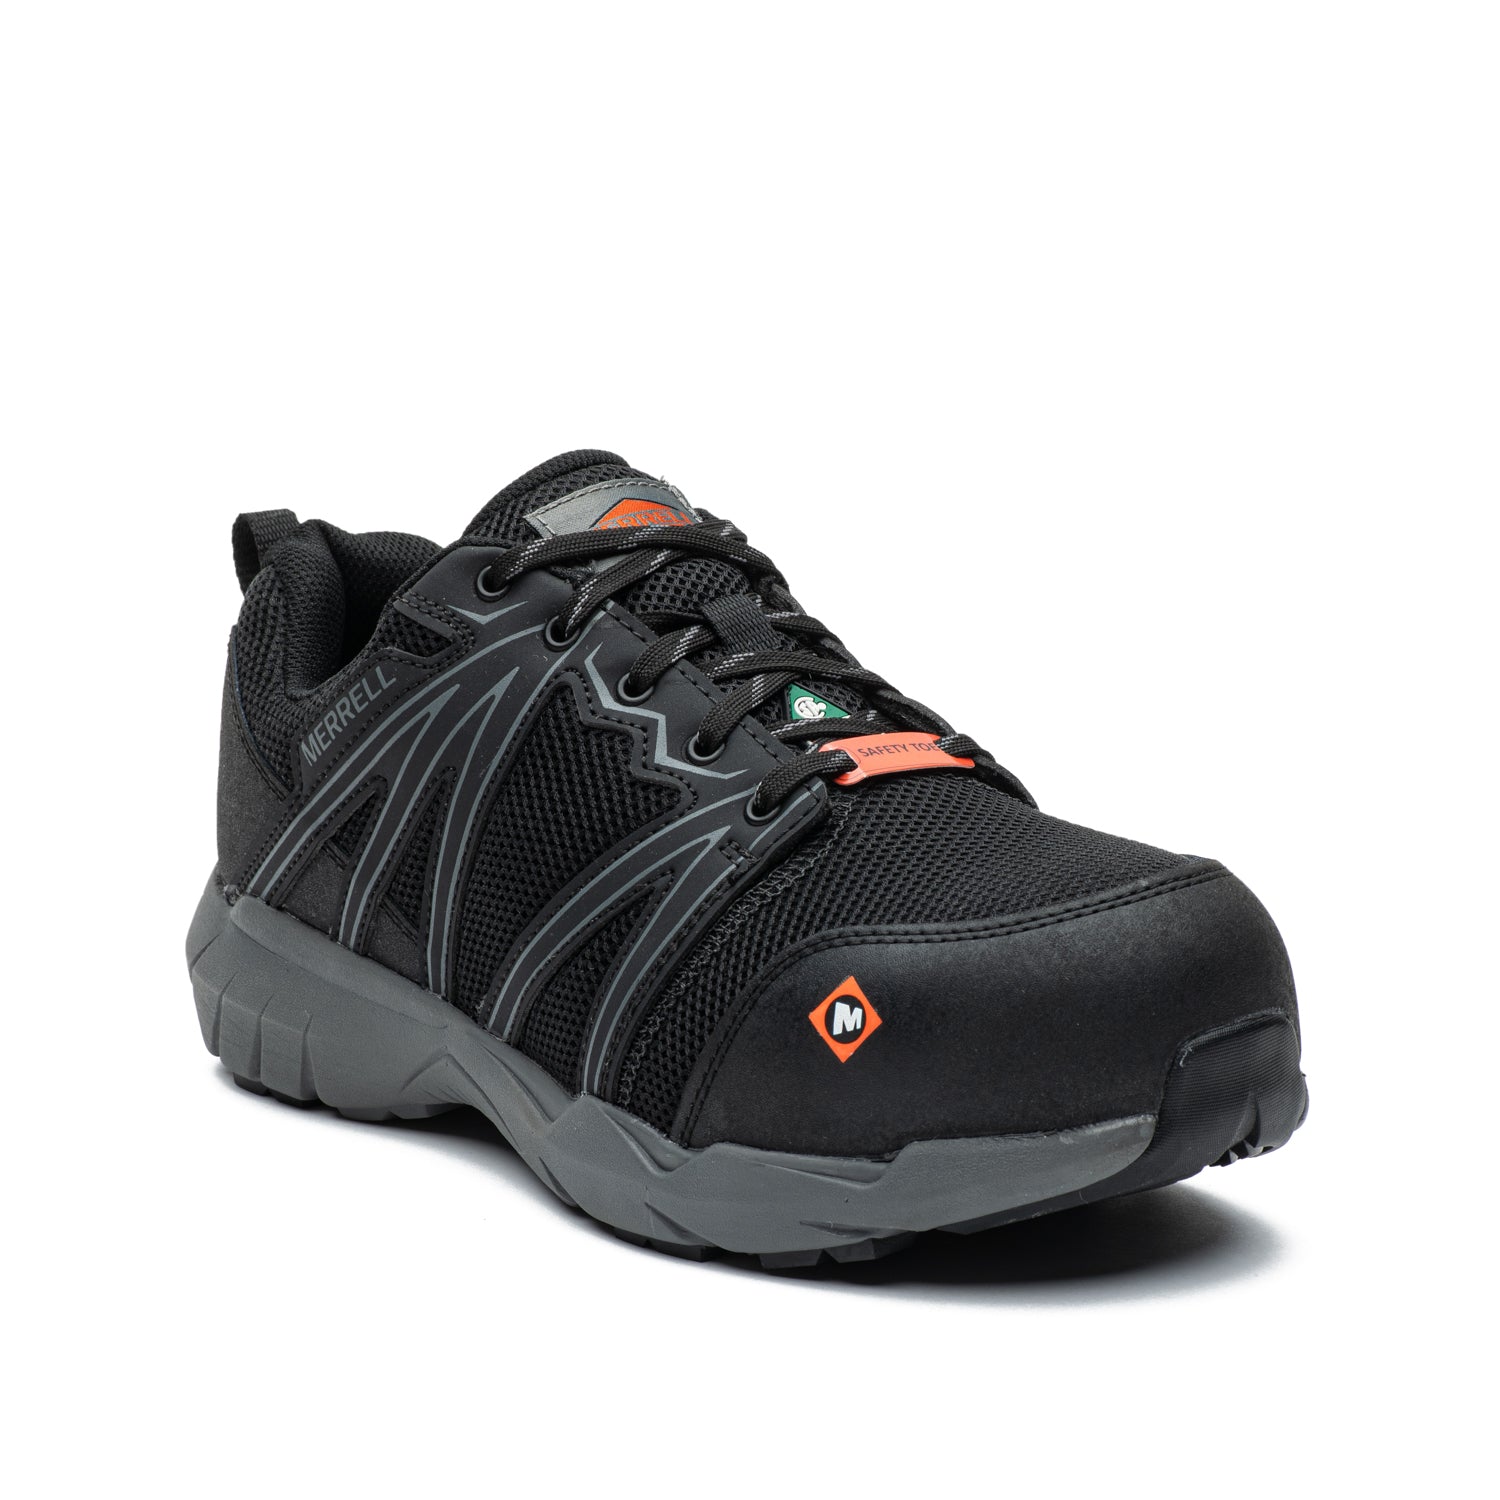 Fullbench Superlite CSA safety shoes - J17541 – Mister Safety Shoes Inc